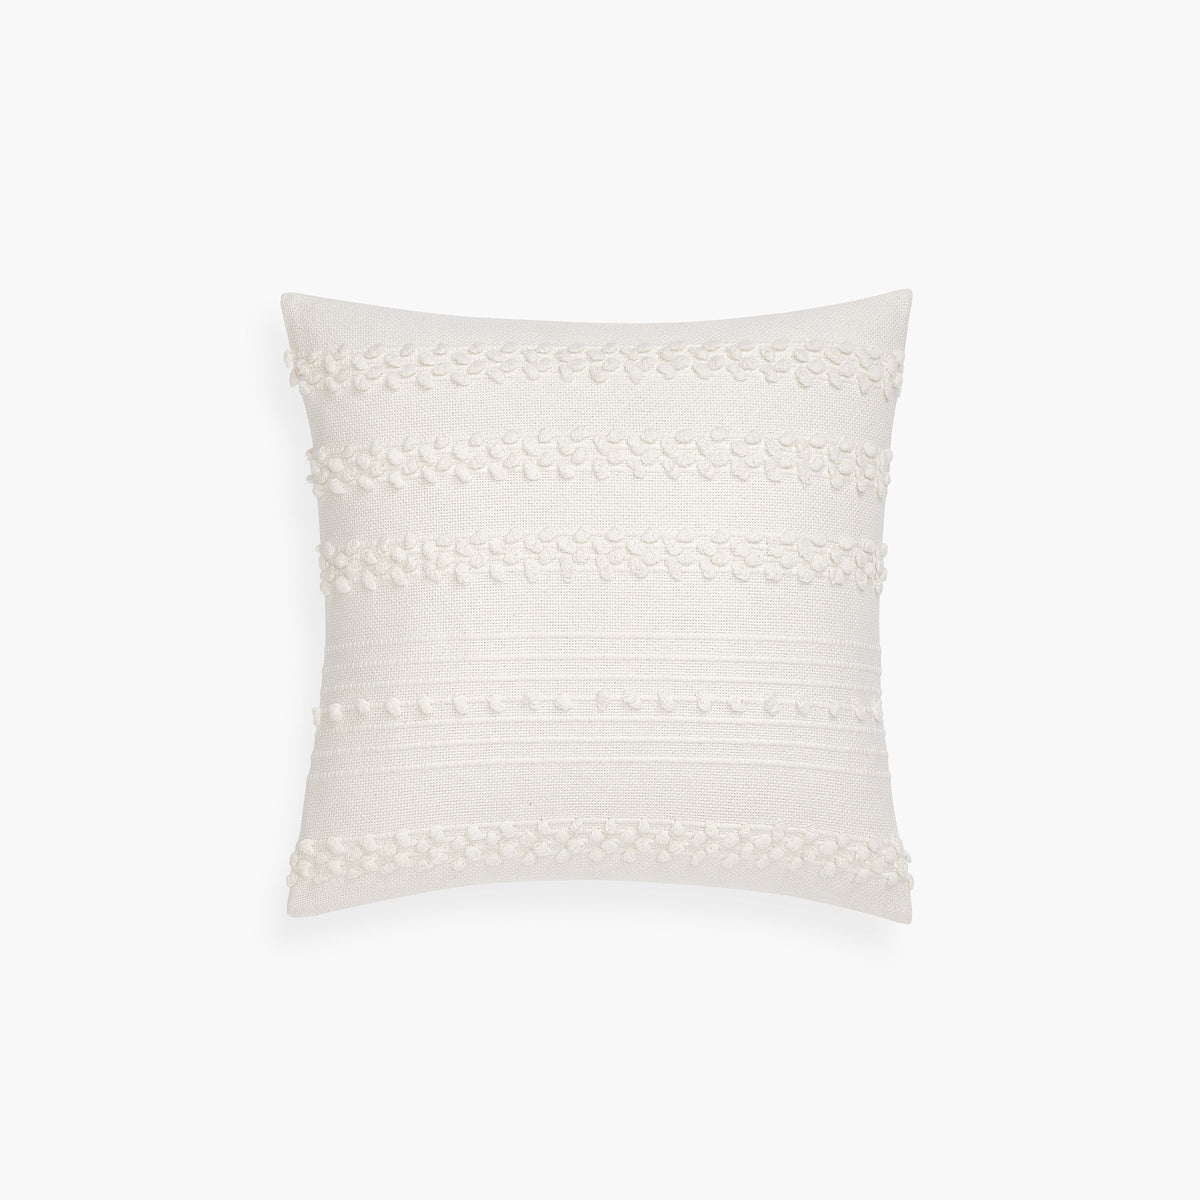 Under The Canopy Tufted Handmade Pillow - Natural Natural Pillows